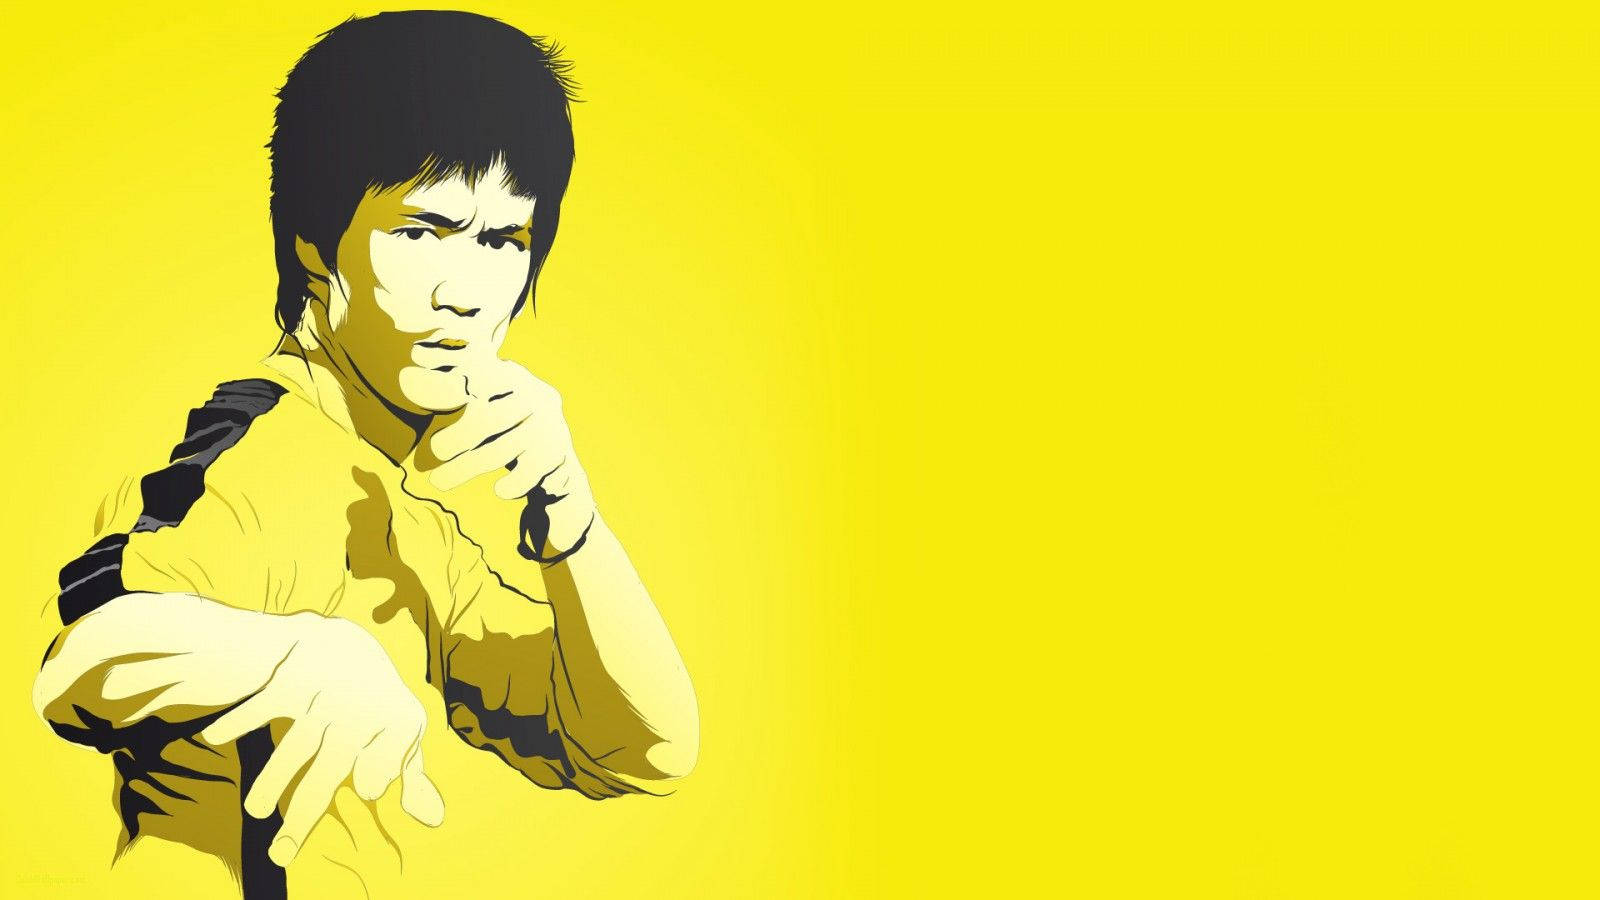 Bruce Lee Exhibiting Mastery in Yellow Dress Wallpaper